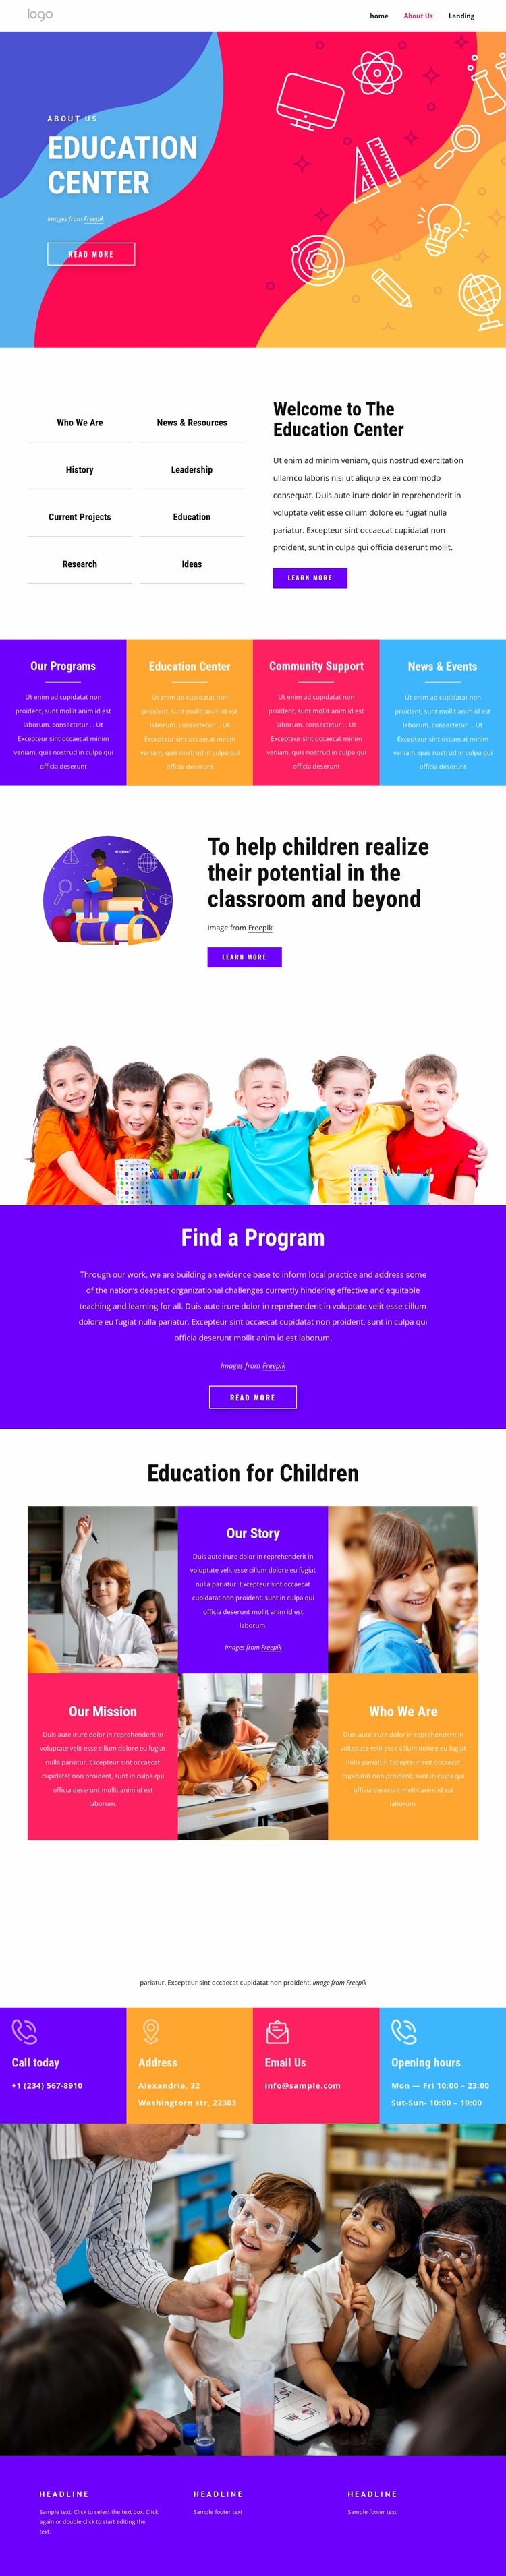 Family and education center Website Mockup